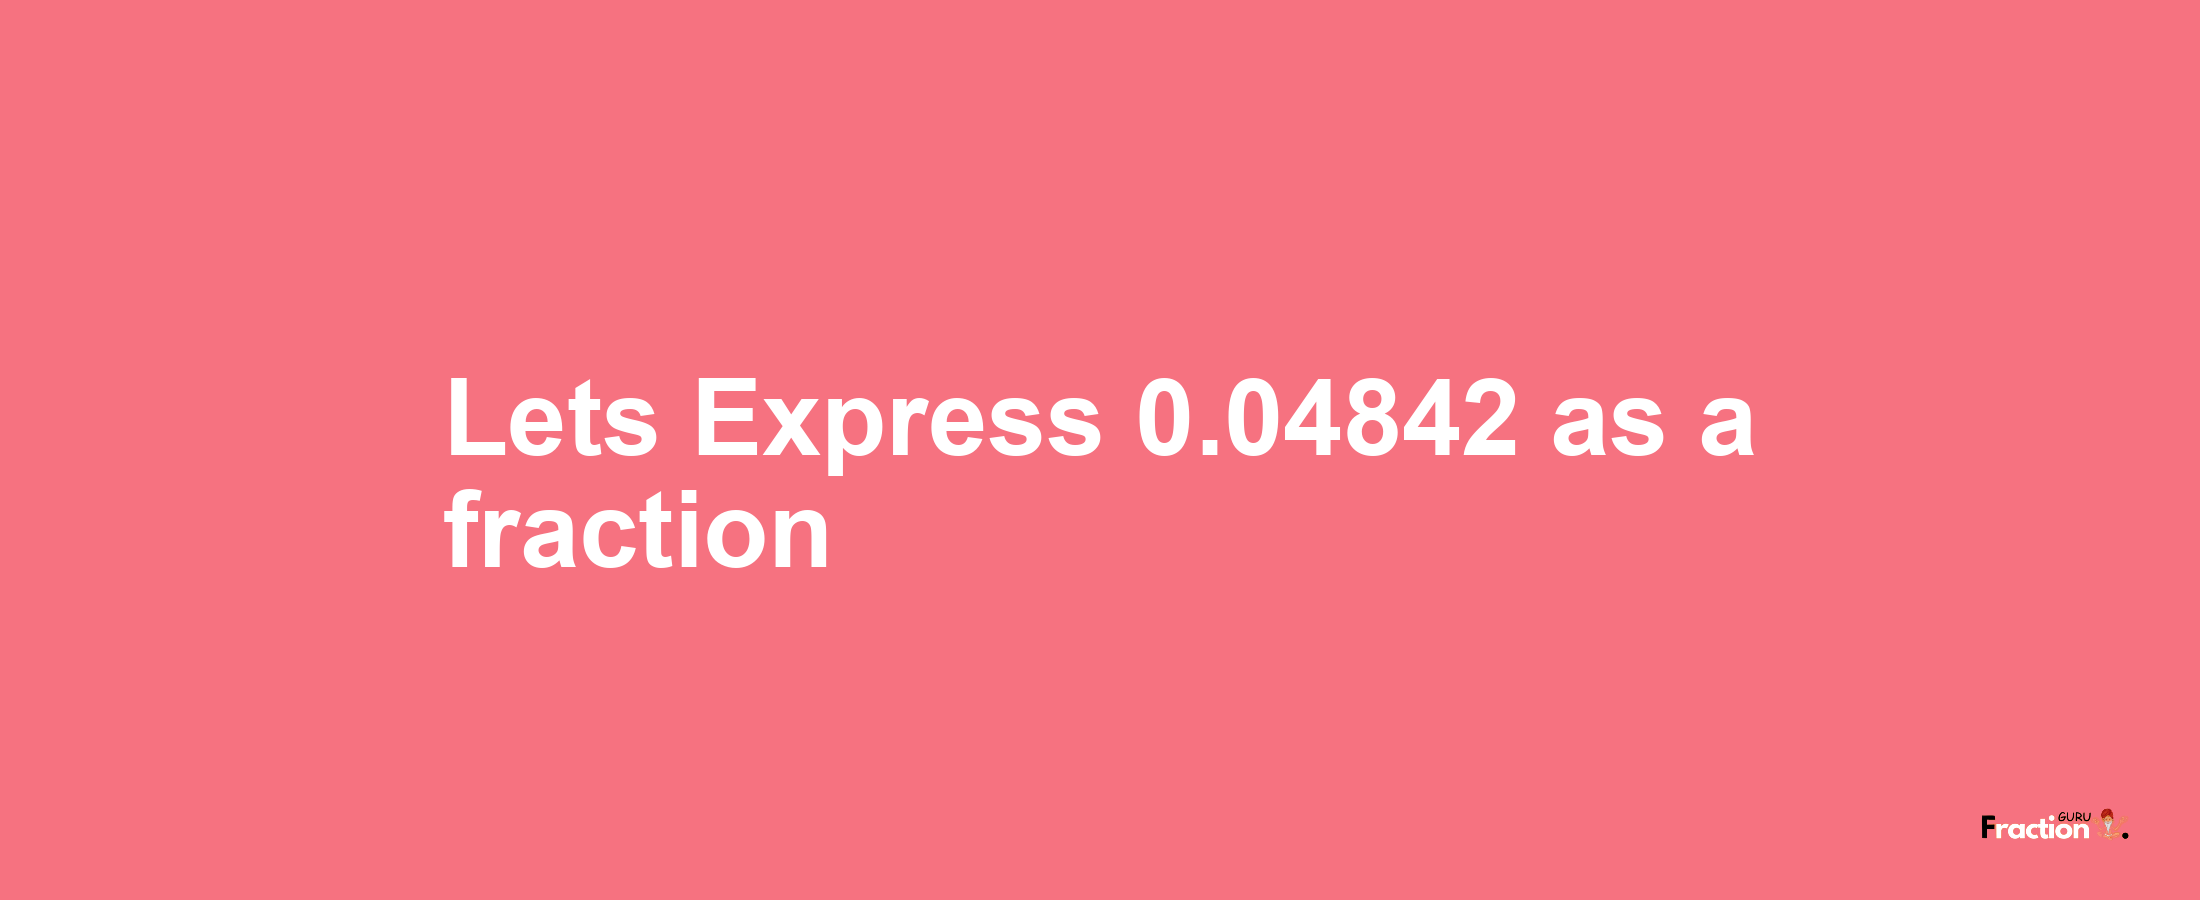 Lets Express 0.04842 as afraction